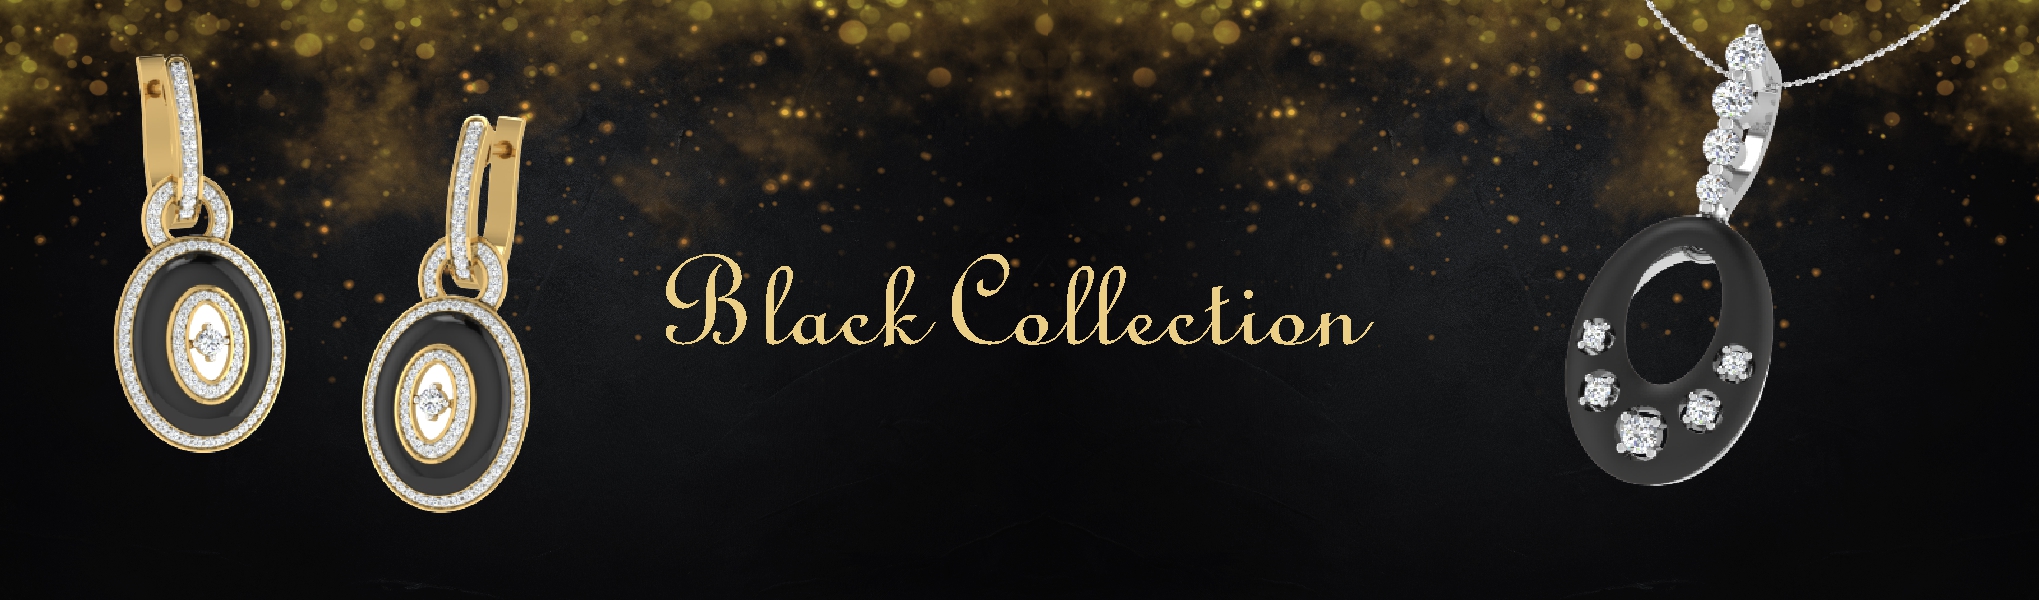 black collection